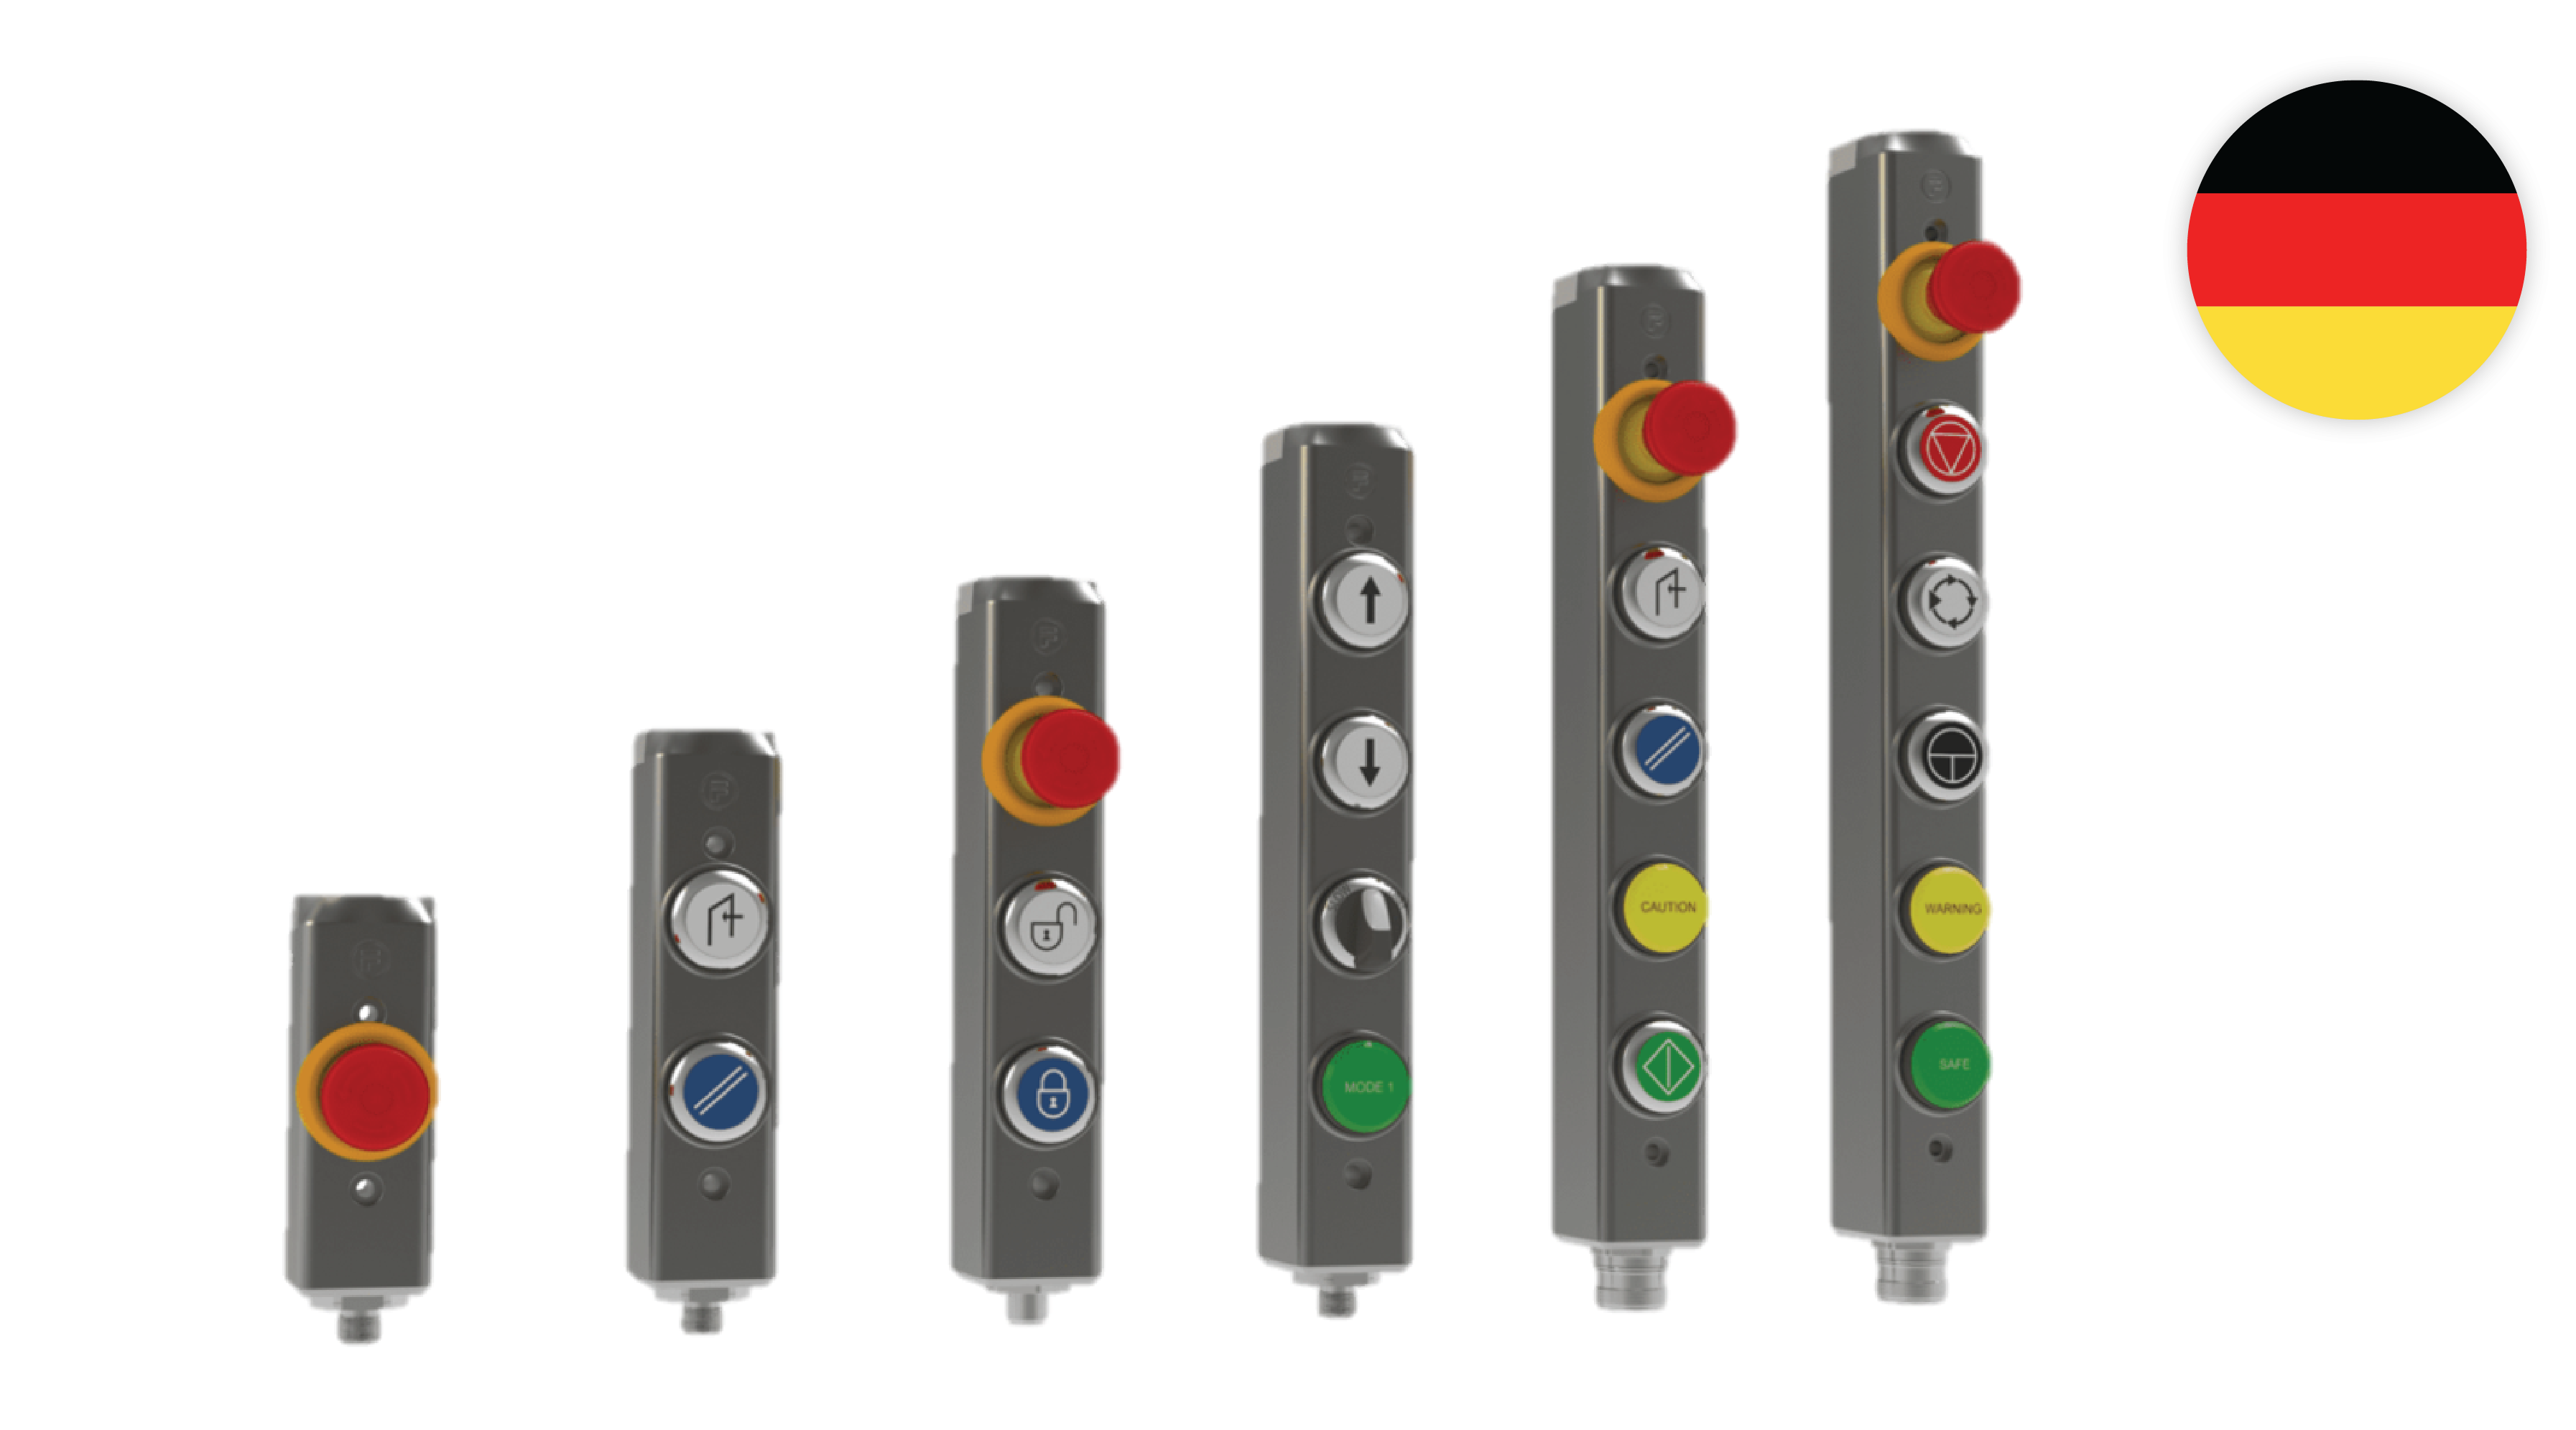 6 different tGard units from 1 button to 6 with German flag